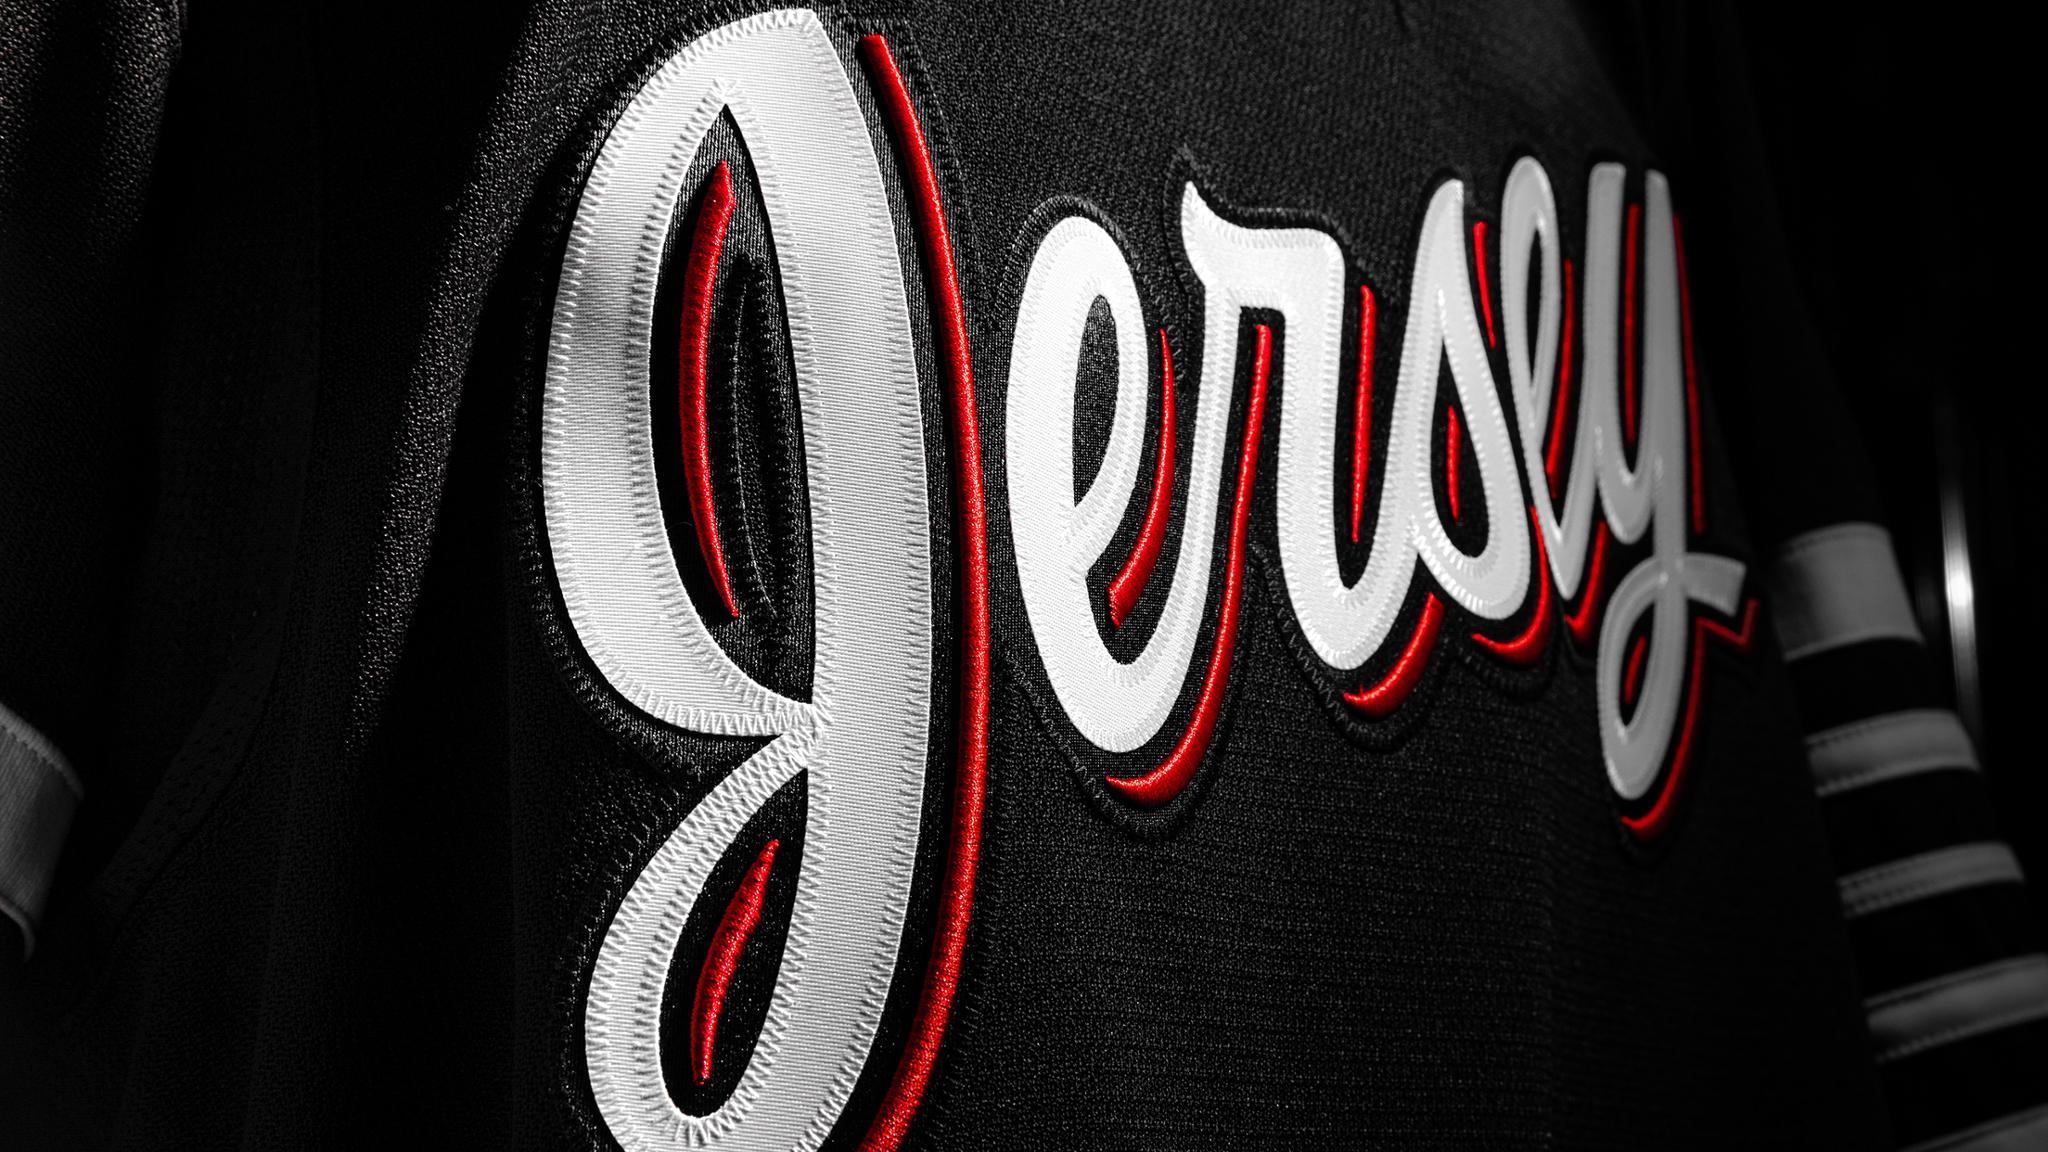 New Jersey Devils Release First-Ever Third Jersey With Adidas